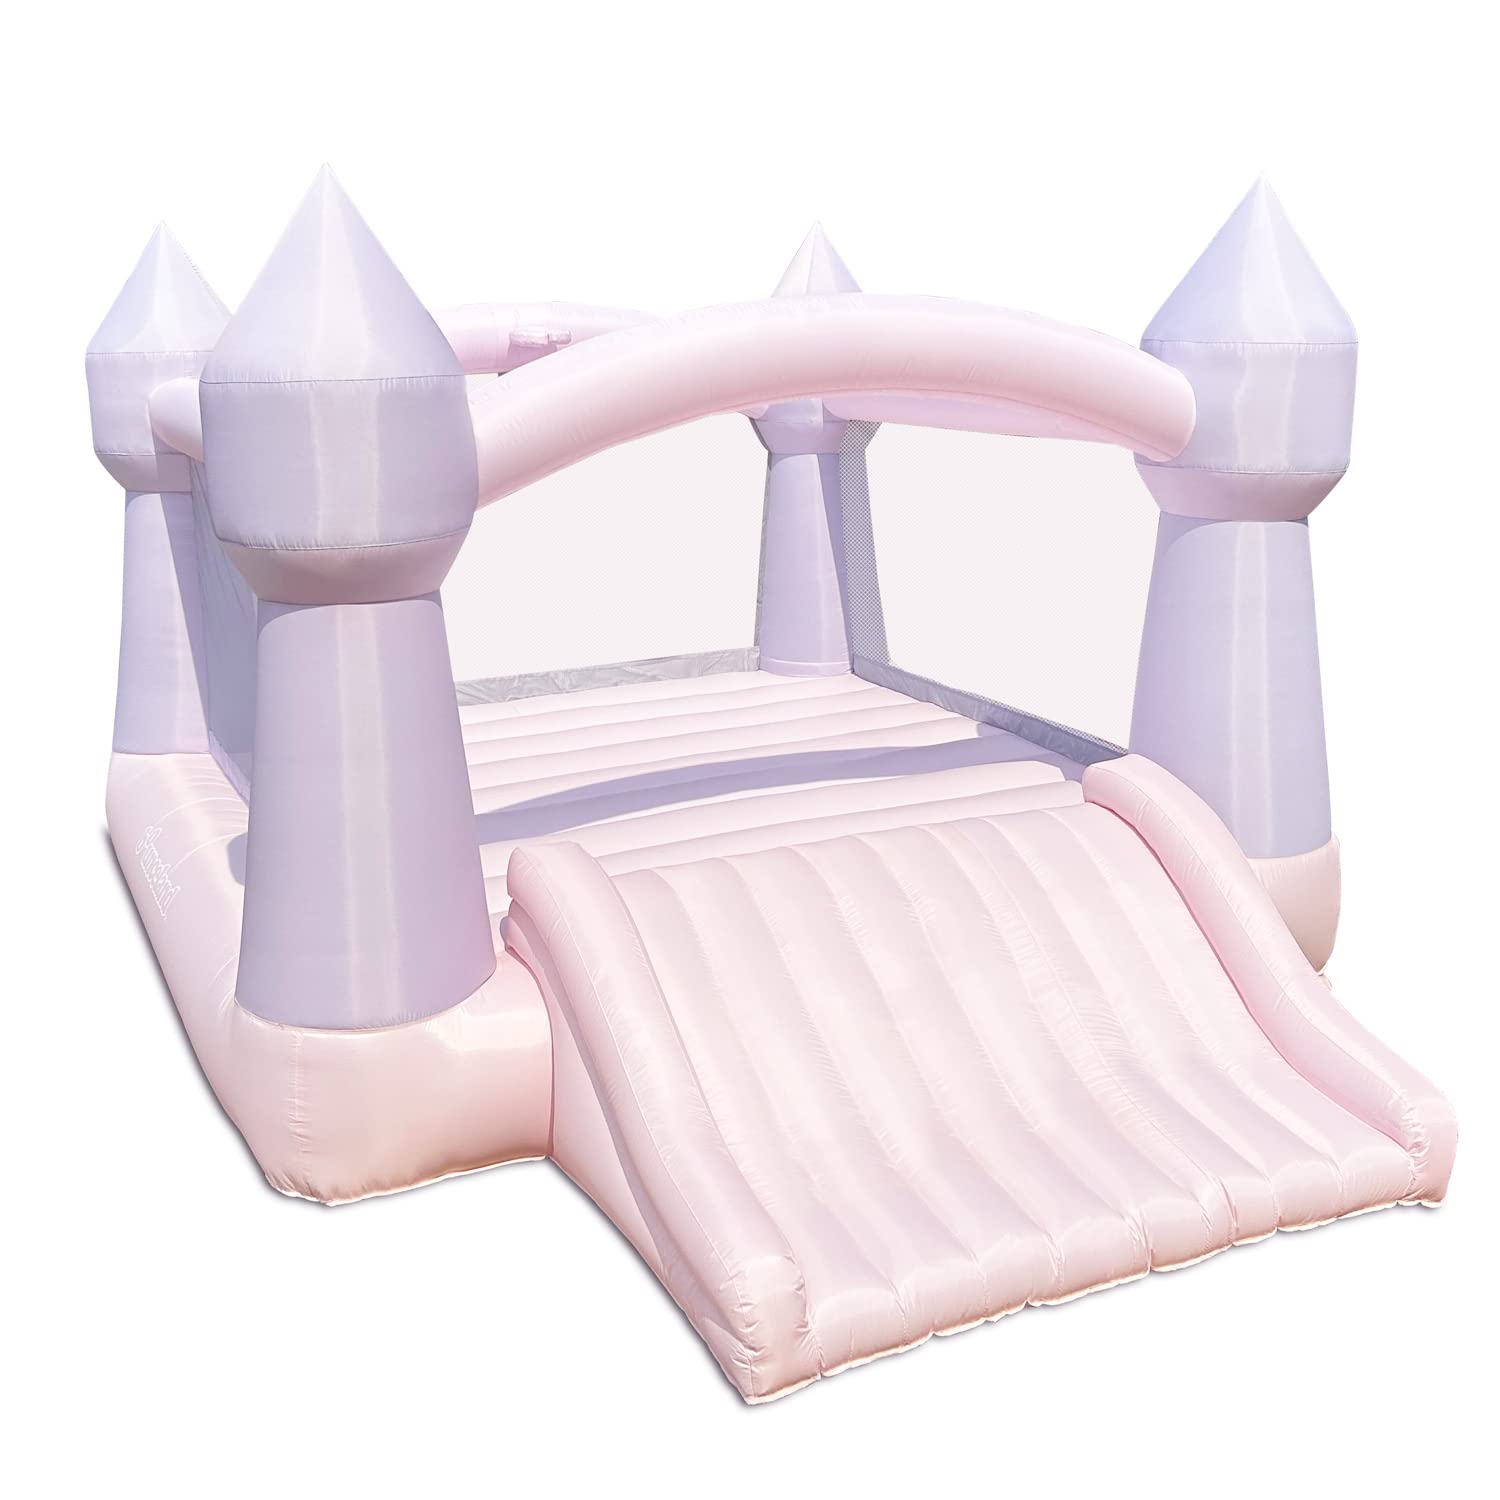 Bounceland Party Castle DayDreamer Cotton Candy Bounce House, 16.4 ft L x 13.1 ft W x 9.3 ft H, Basketball Hoop, UL Blower included, Trendy Pastel Color, Fun Slide & Bounce Area, Castle Theme for Kids